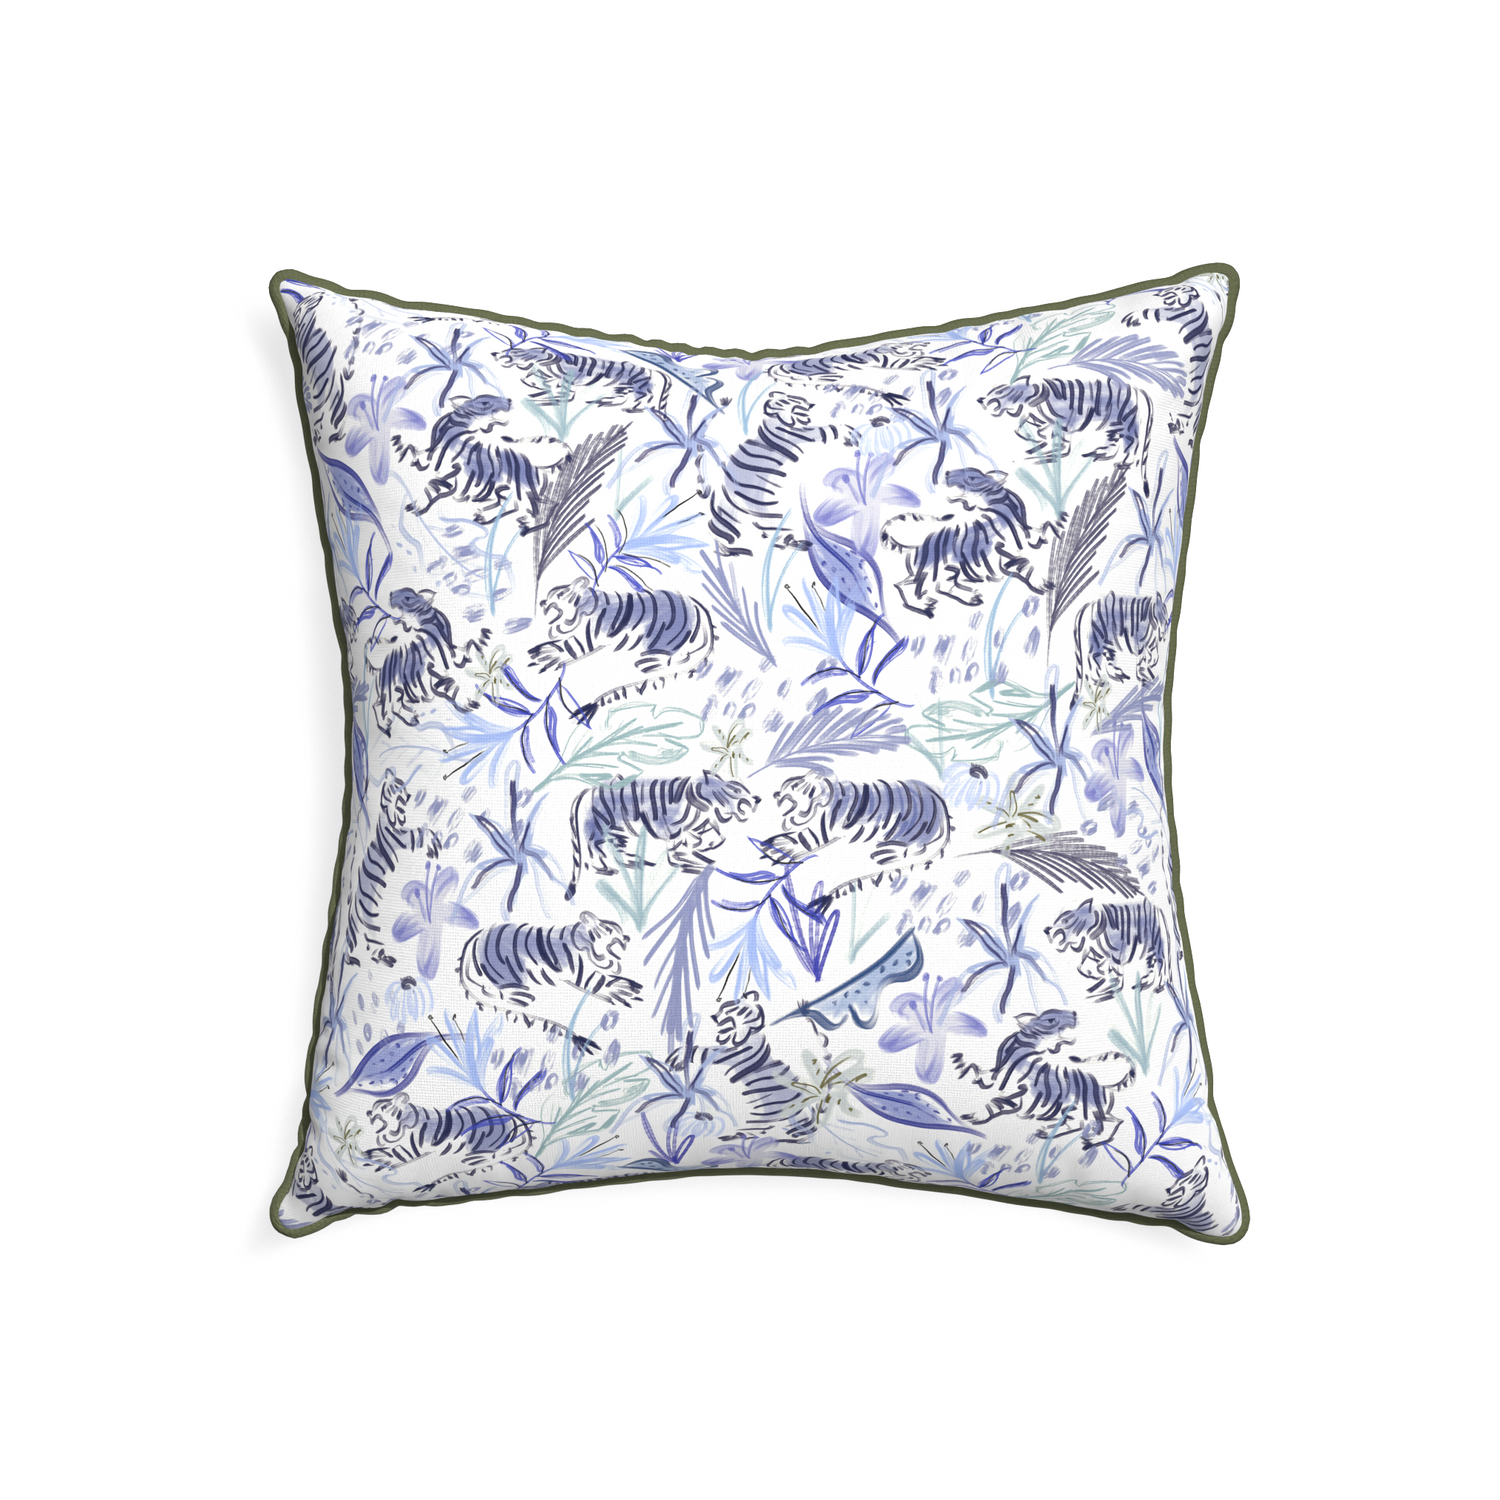 22-square frida blue custom blue with intricate tiger designpillow with f piping on white background